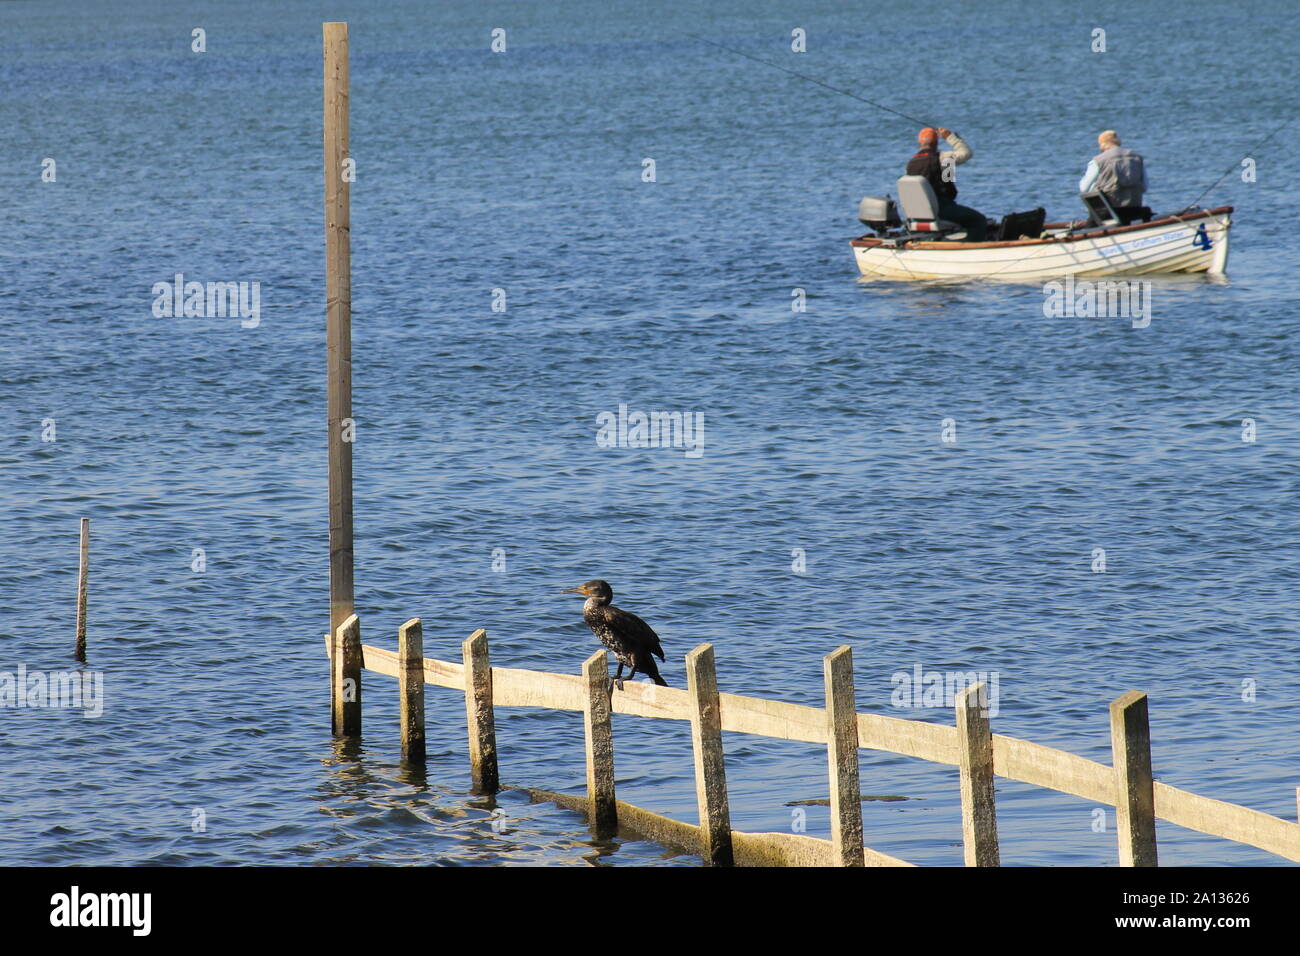 A Cormorant sat on a wooden fence whilst men fish from a boat Stock Photo